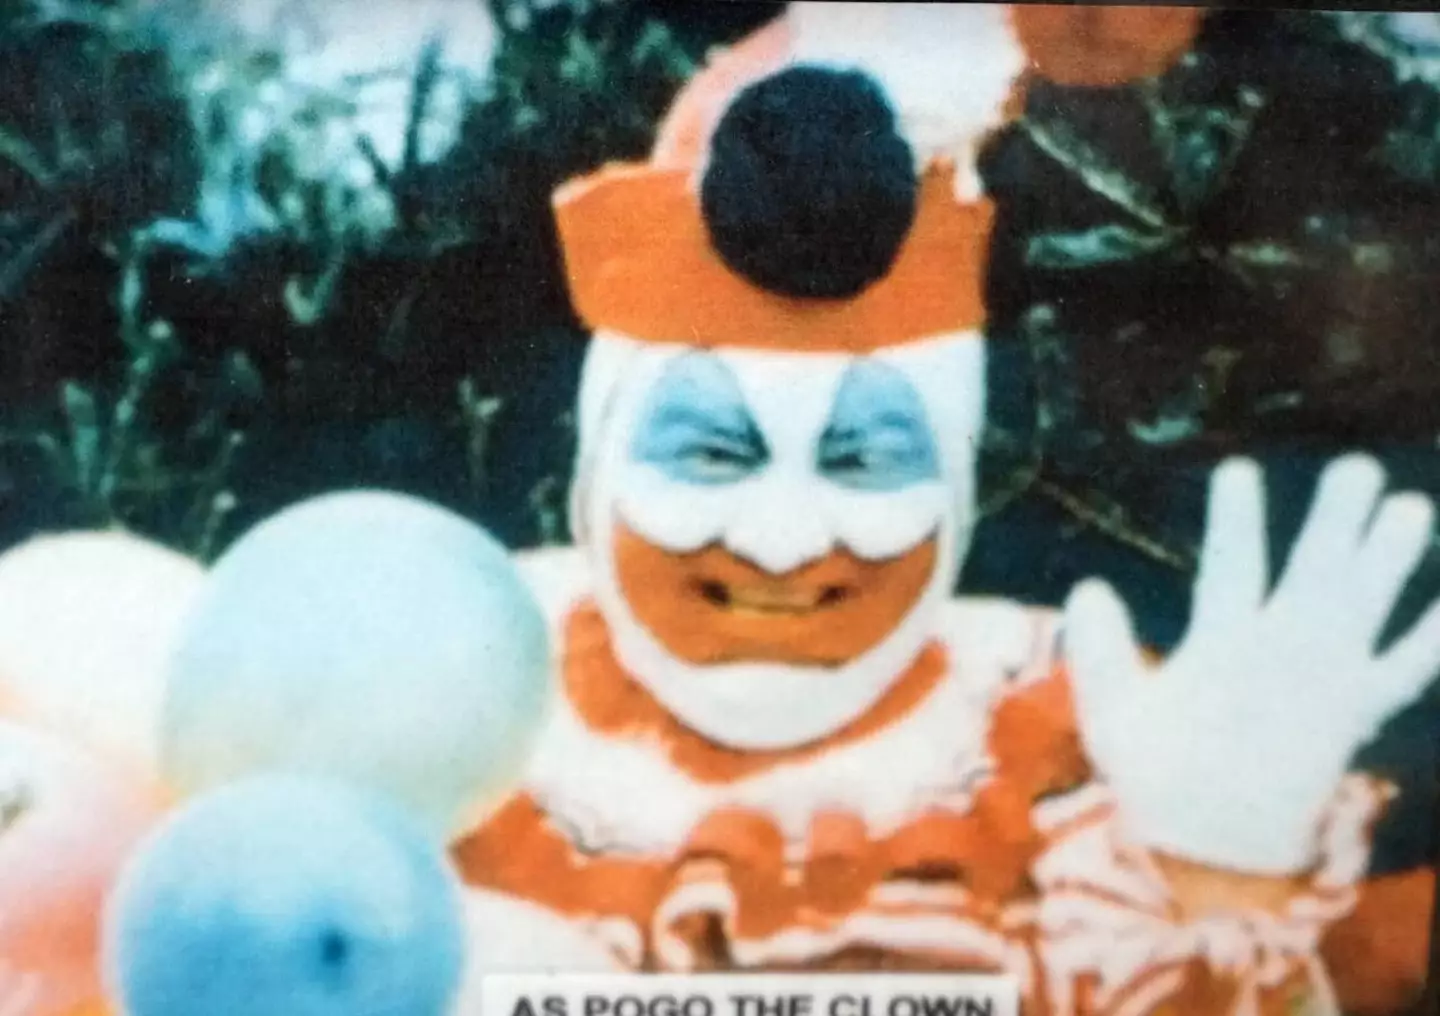 John Wayne Gacy enjoyed dressing up and performing as Pogo the Clown in his spare time.